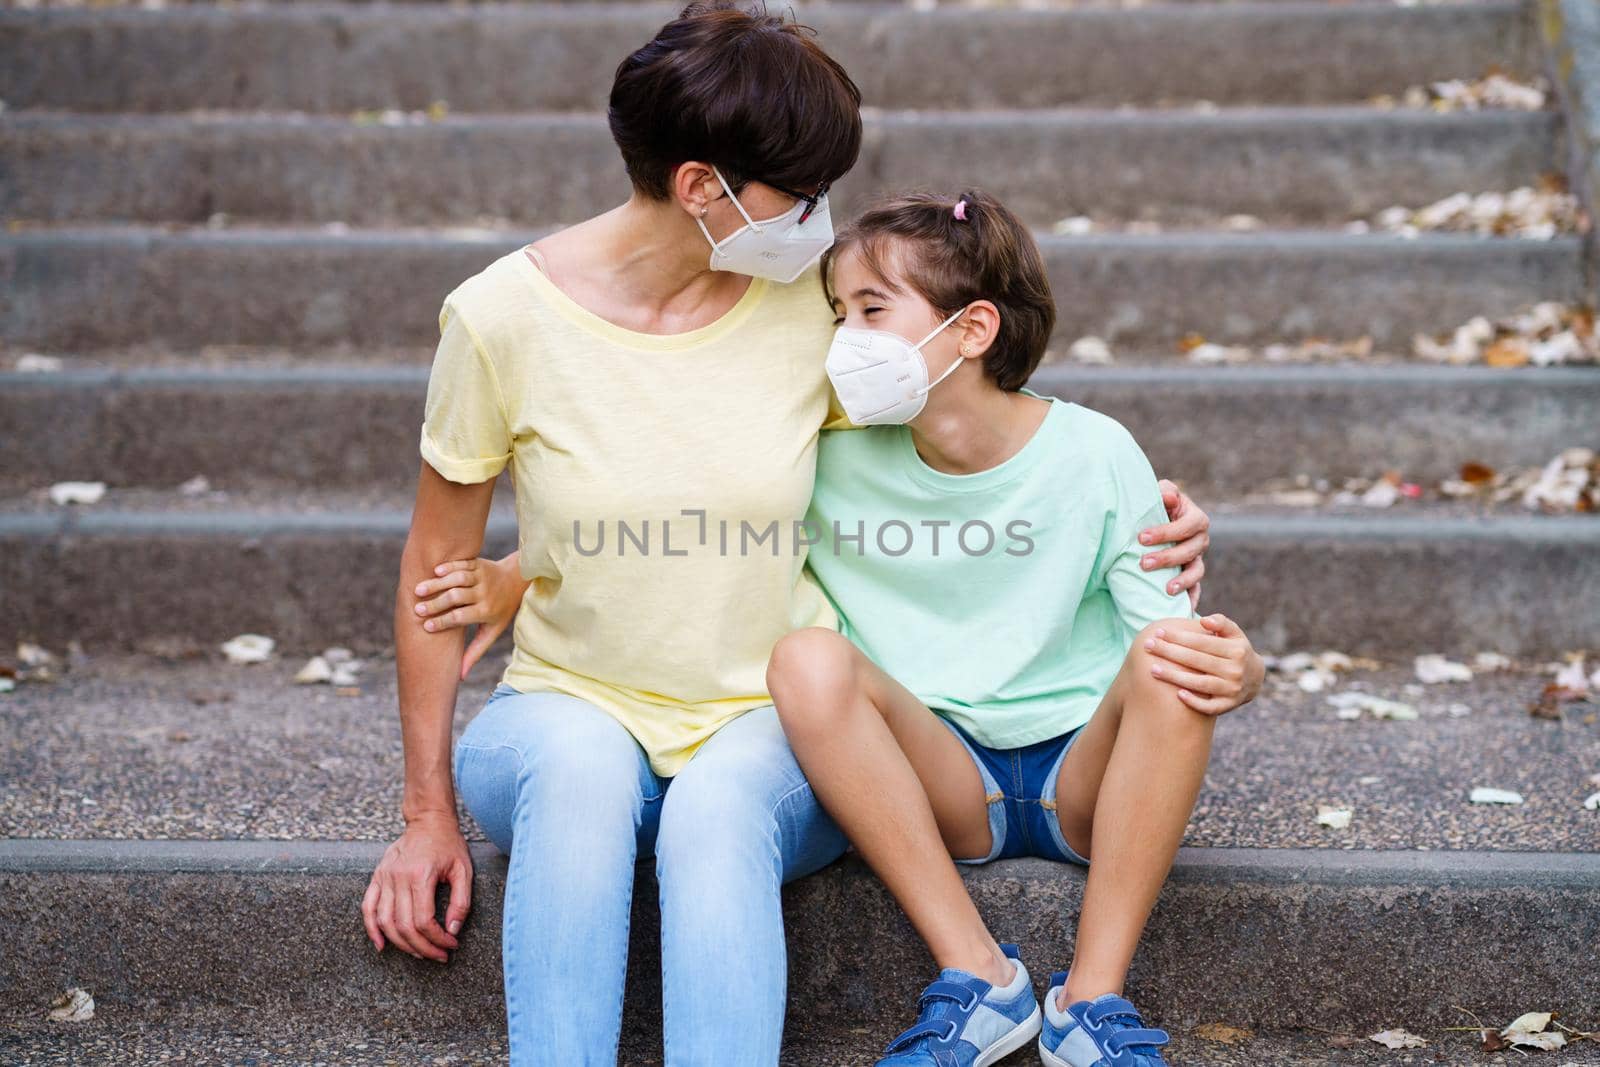 Middle-aged mother and daughter sit on the street wearing masks by javiindy